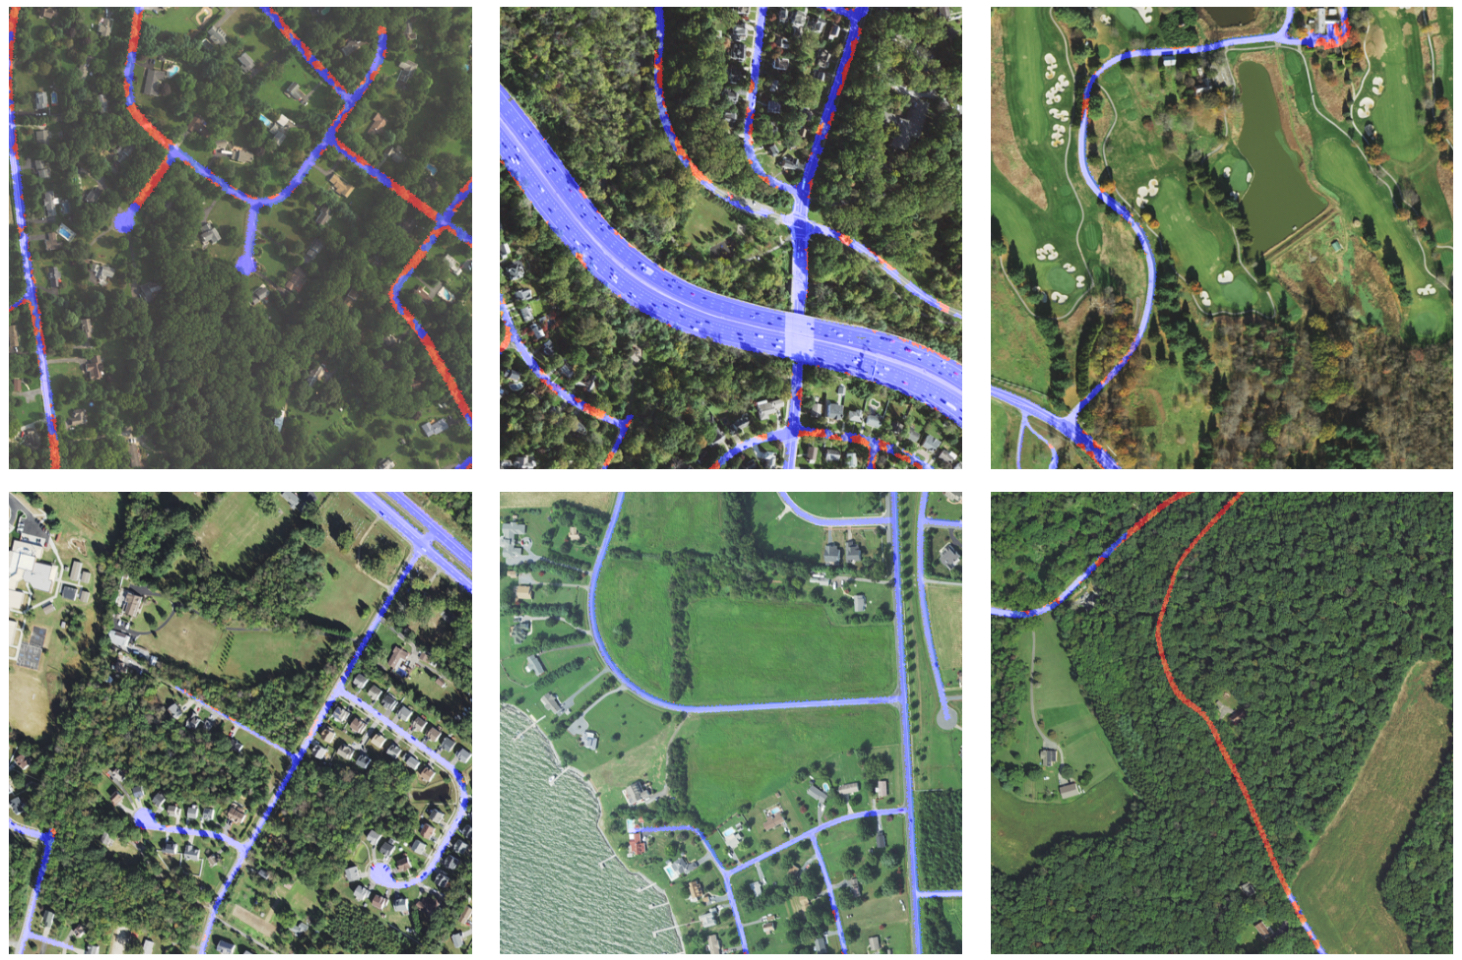 Seeing the roads through the trees: A benchmark for modeling spatial dependencies with aerial imagery